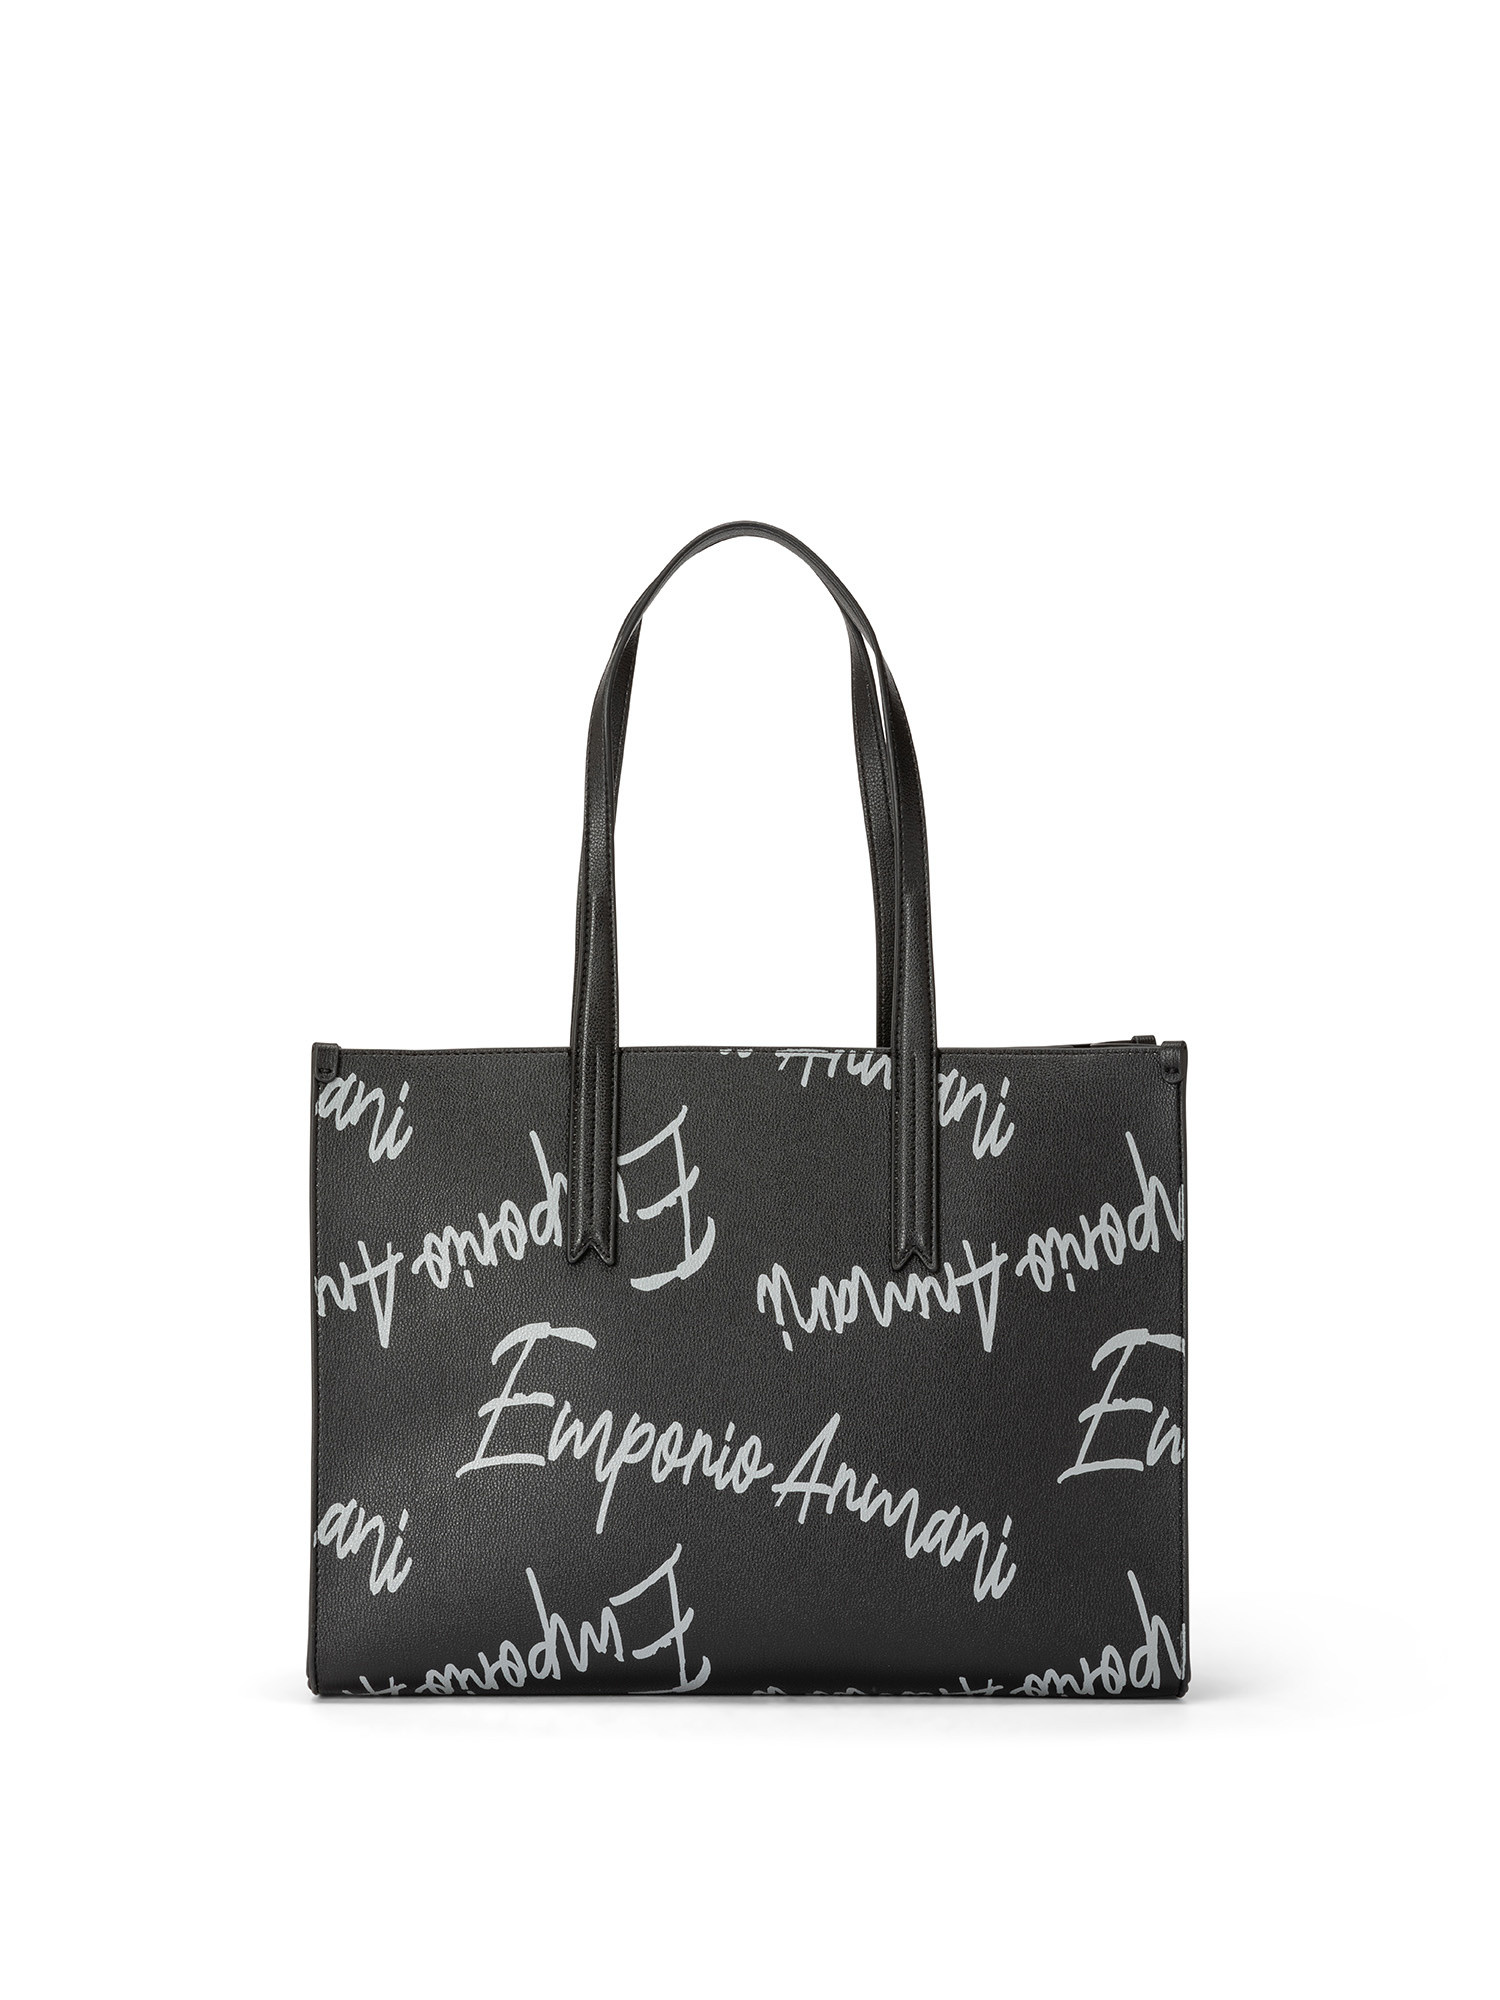 Emporio Armani - Bag with all-over lettering logo, Black, large image number 0